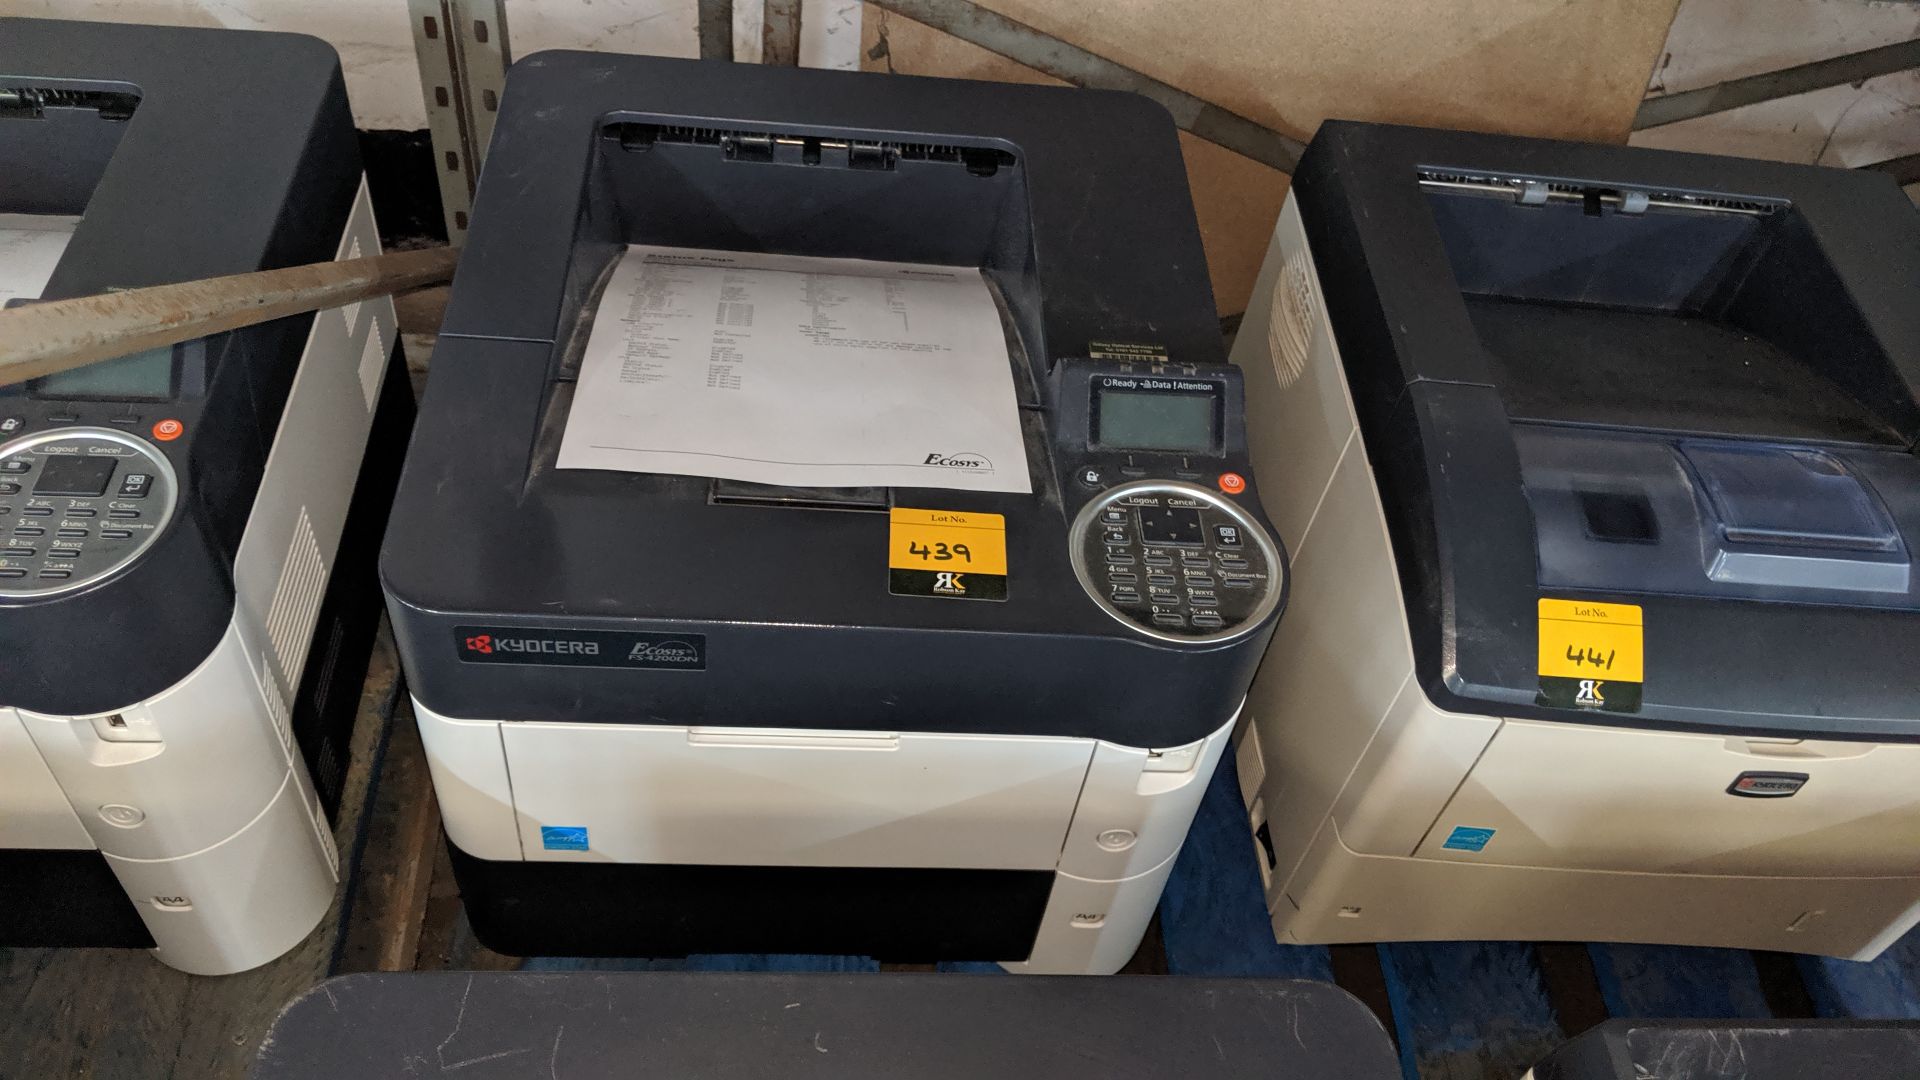 Kyocera A4 desktop laser printer model FS-4200DN. This is one of a large number of lots being sold